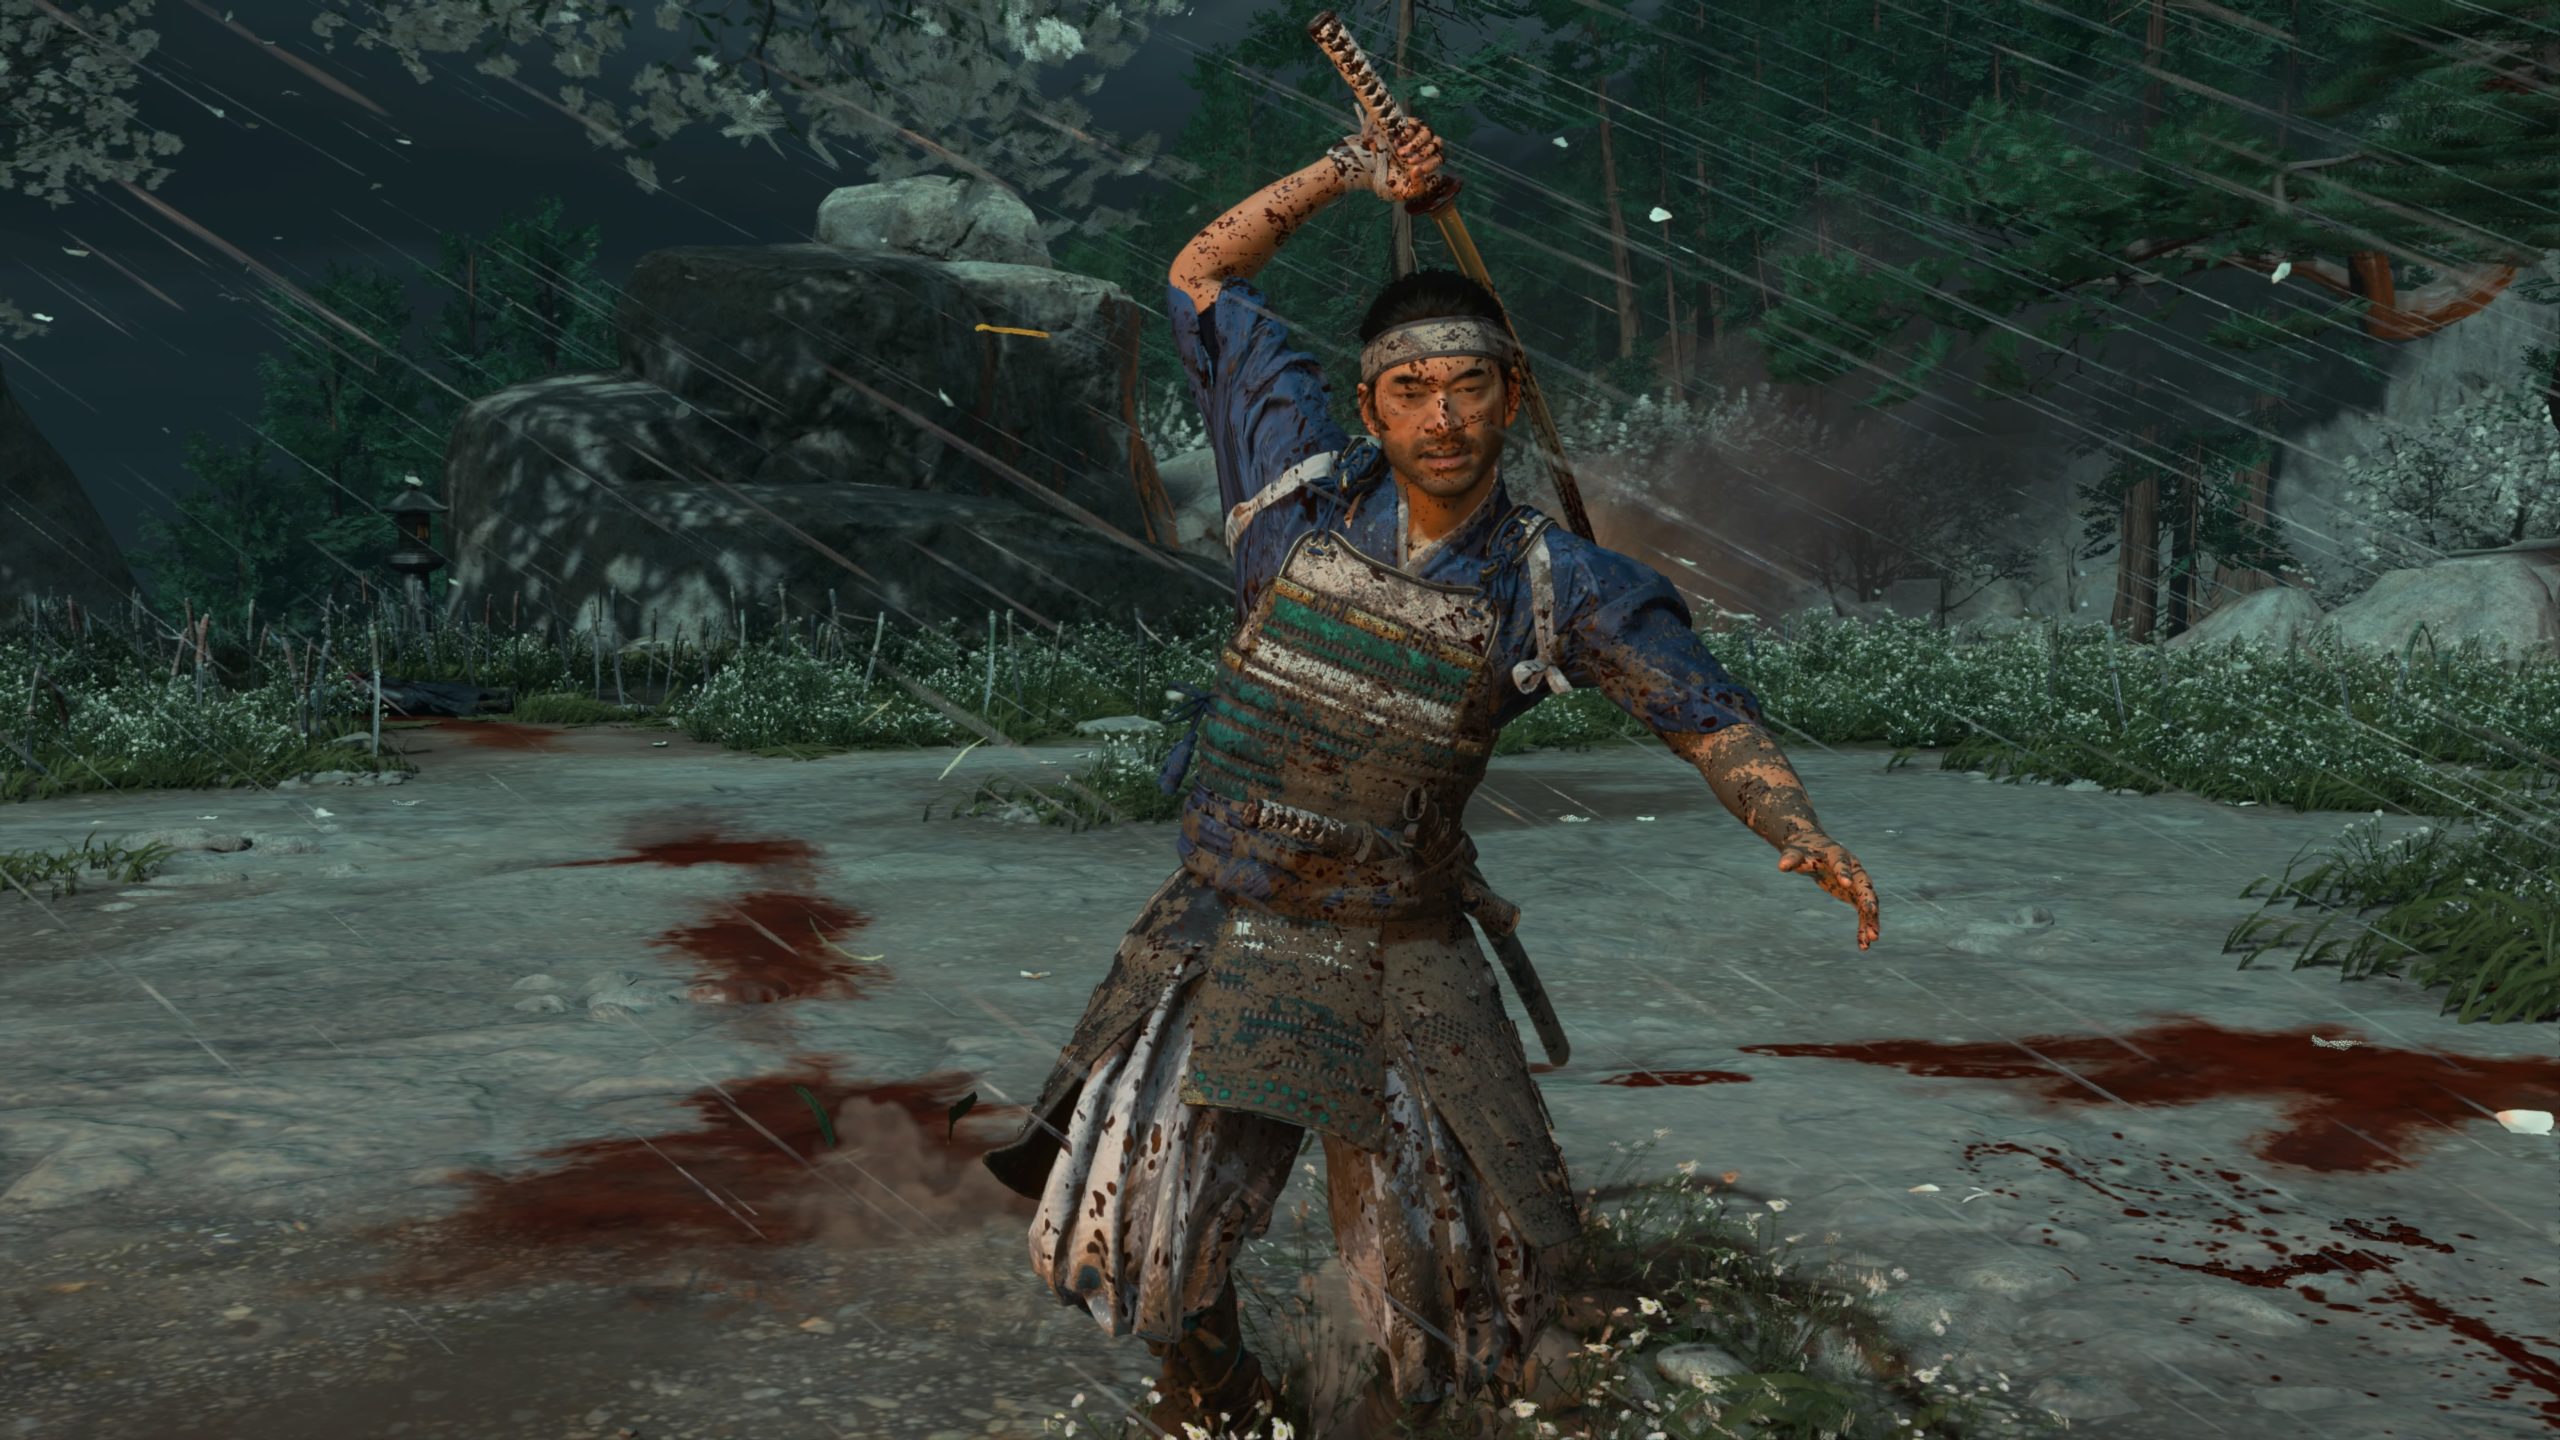 Ghost of Tsushima: 10 Tips To Help You Become A Master Samurai